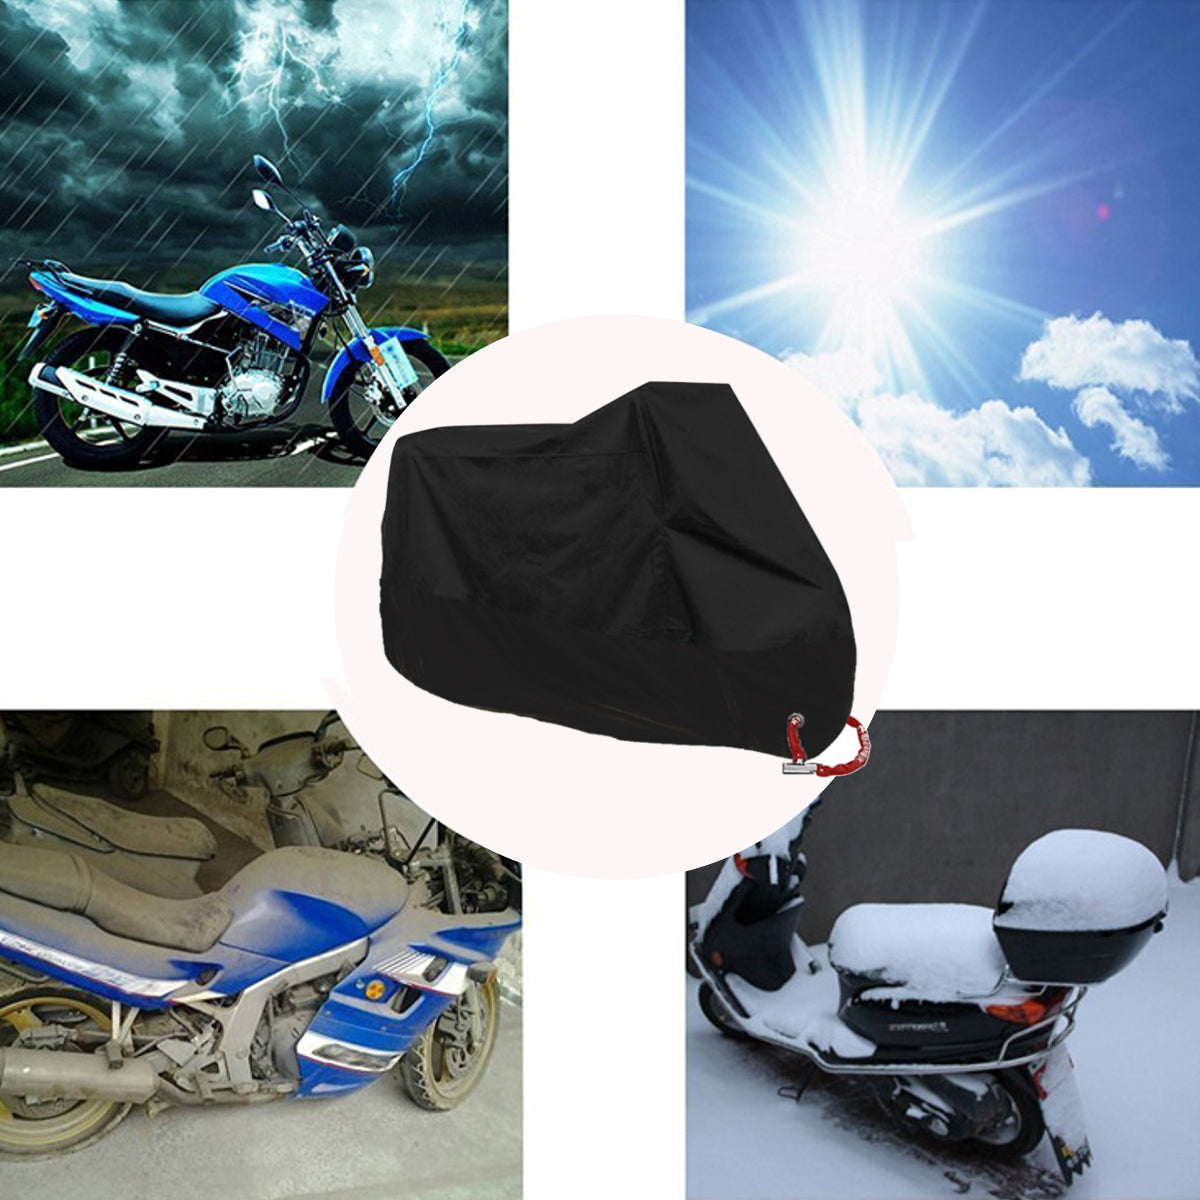 White Smoke 190T Motorcycle Rain Cover Scooter Waterproof UV Dust Protector Black Size M